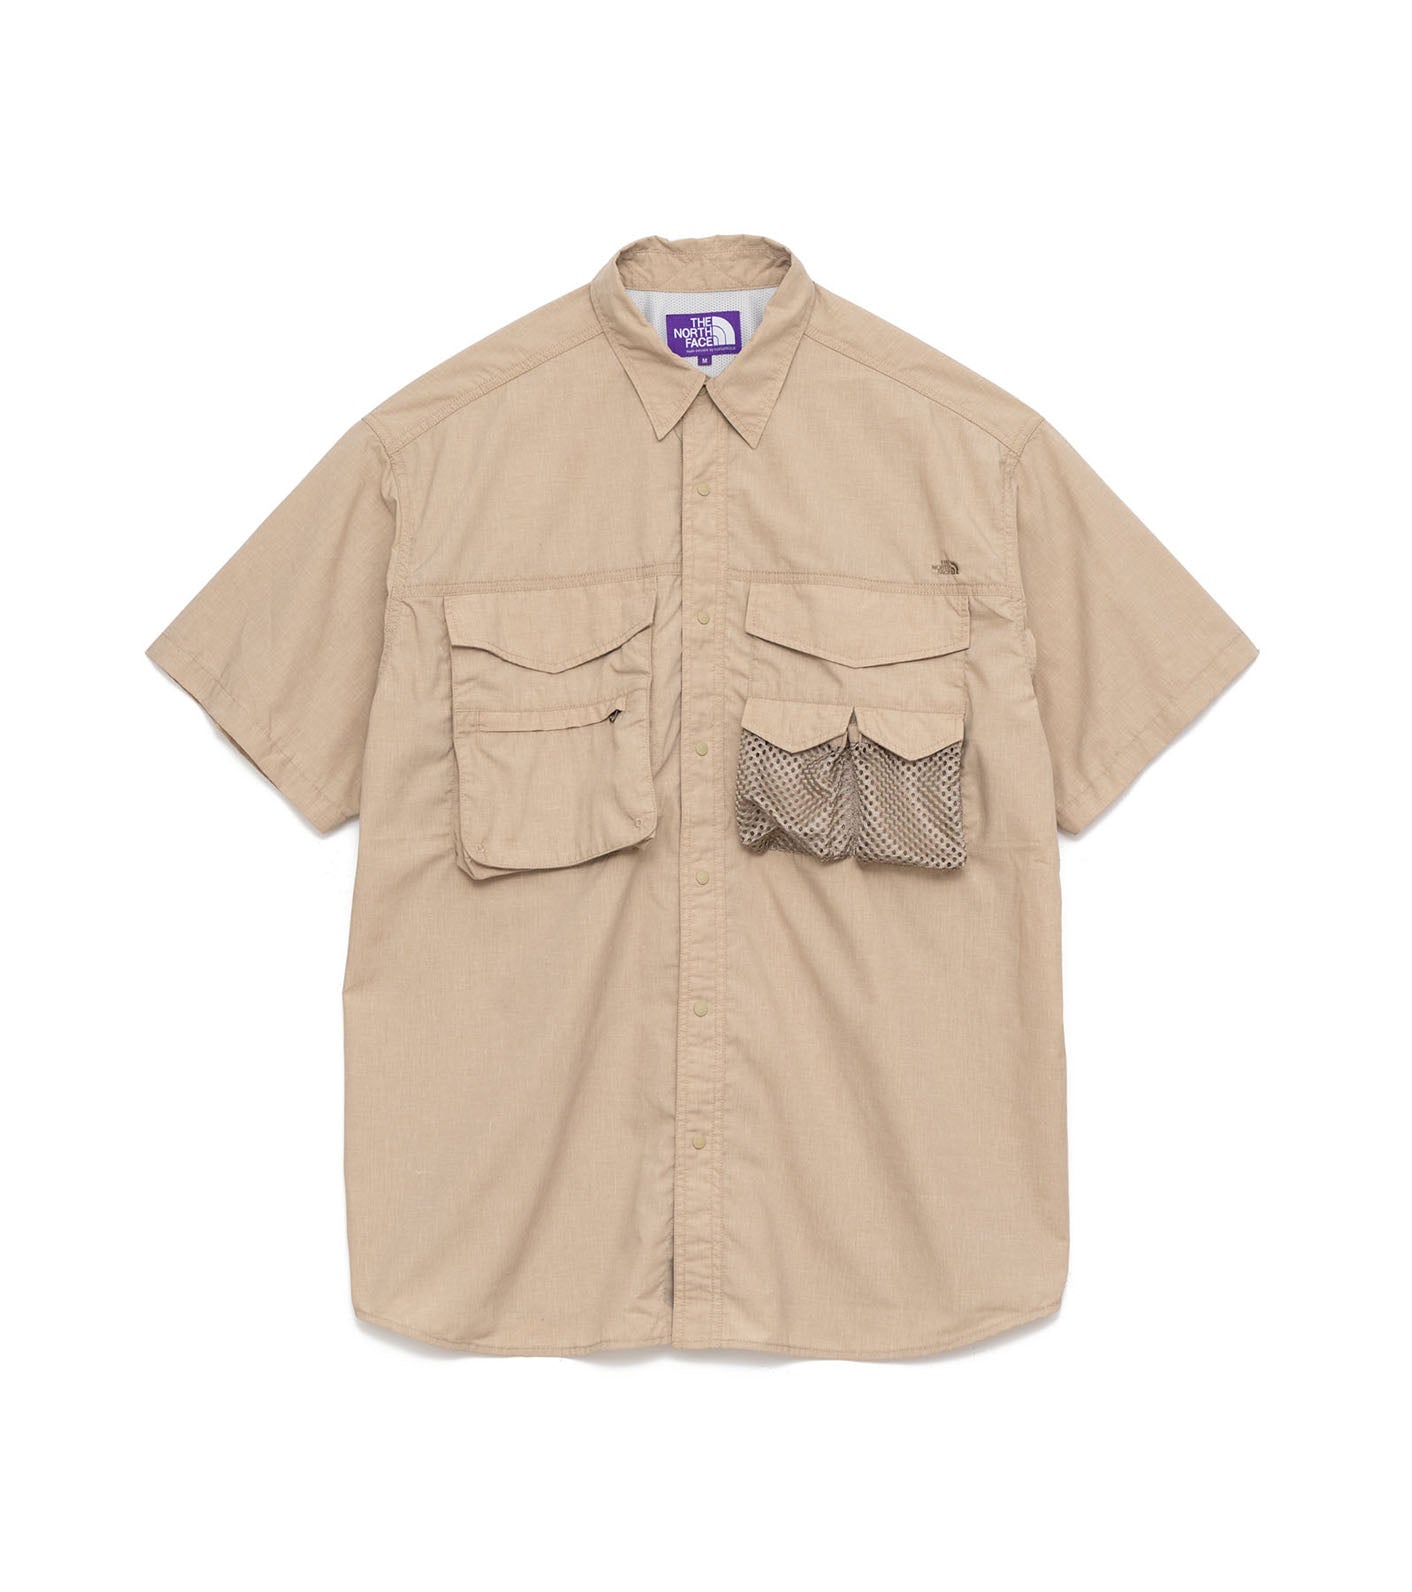 THE NORTH FACE PURPLE LABEL Polyester Linen Field HS Shirt